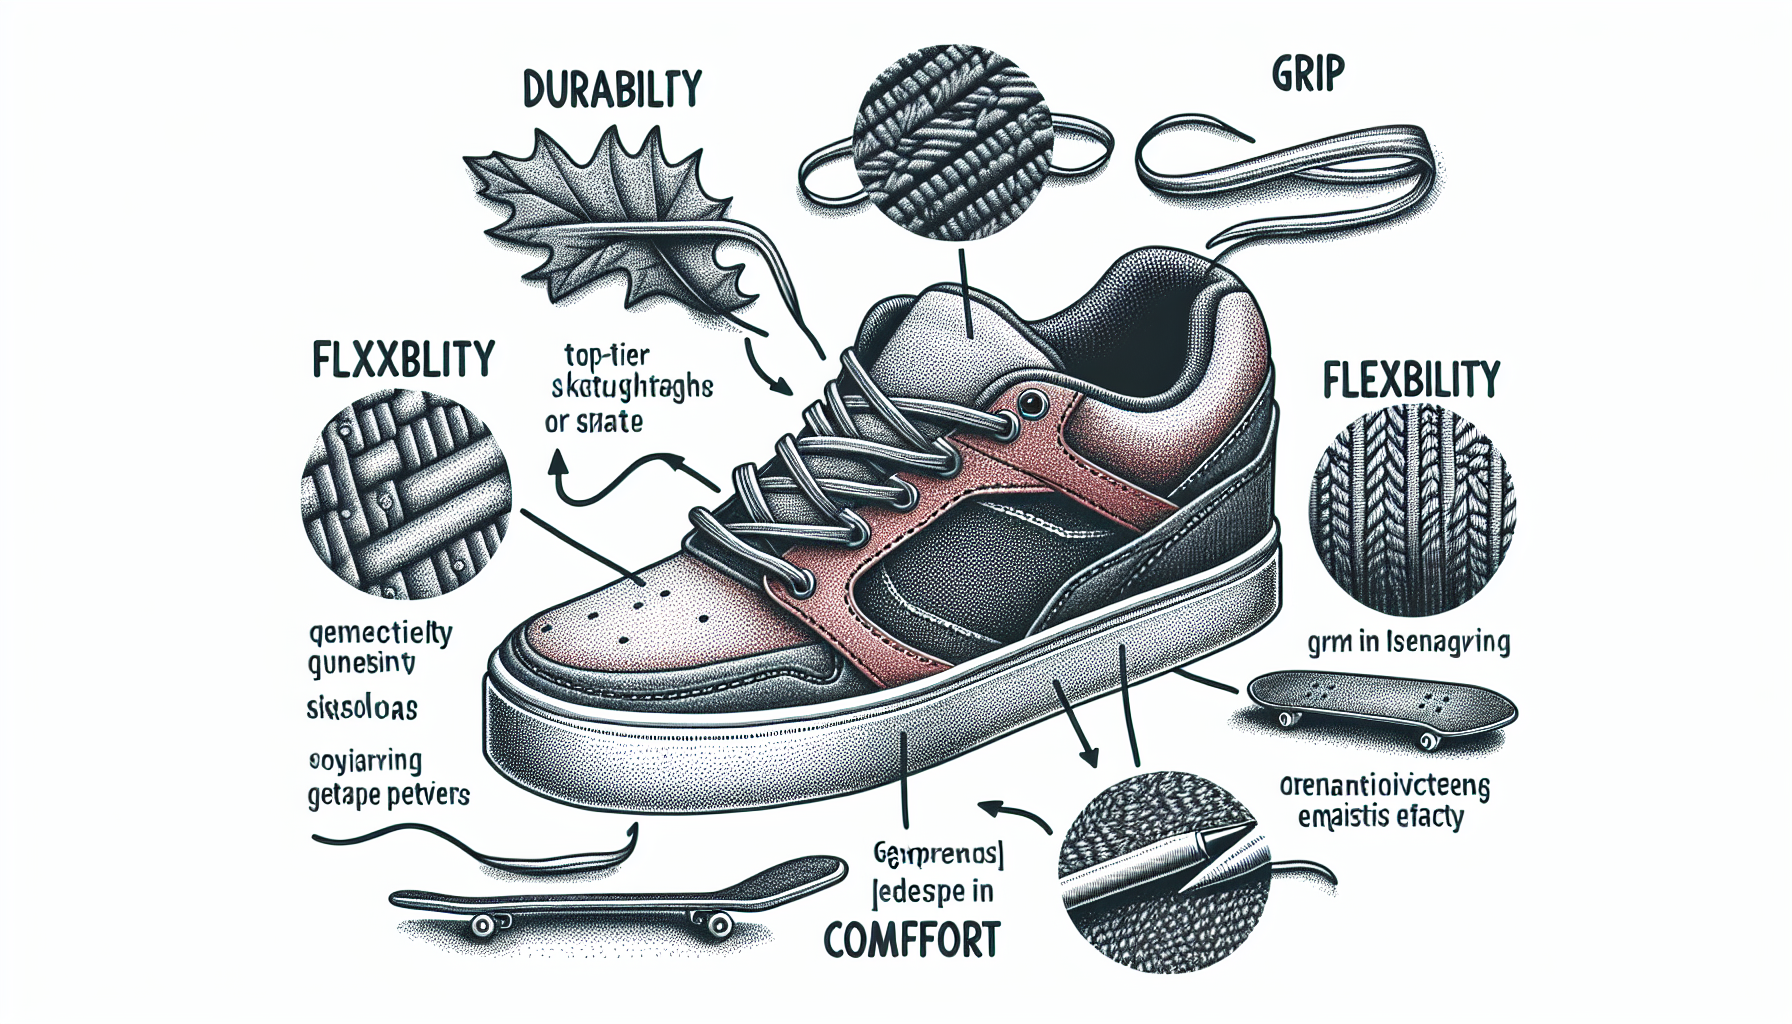 What Are The Features To Look For In High-quality Skate Shoes?